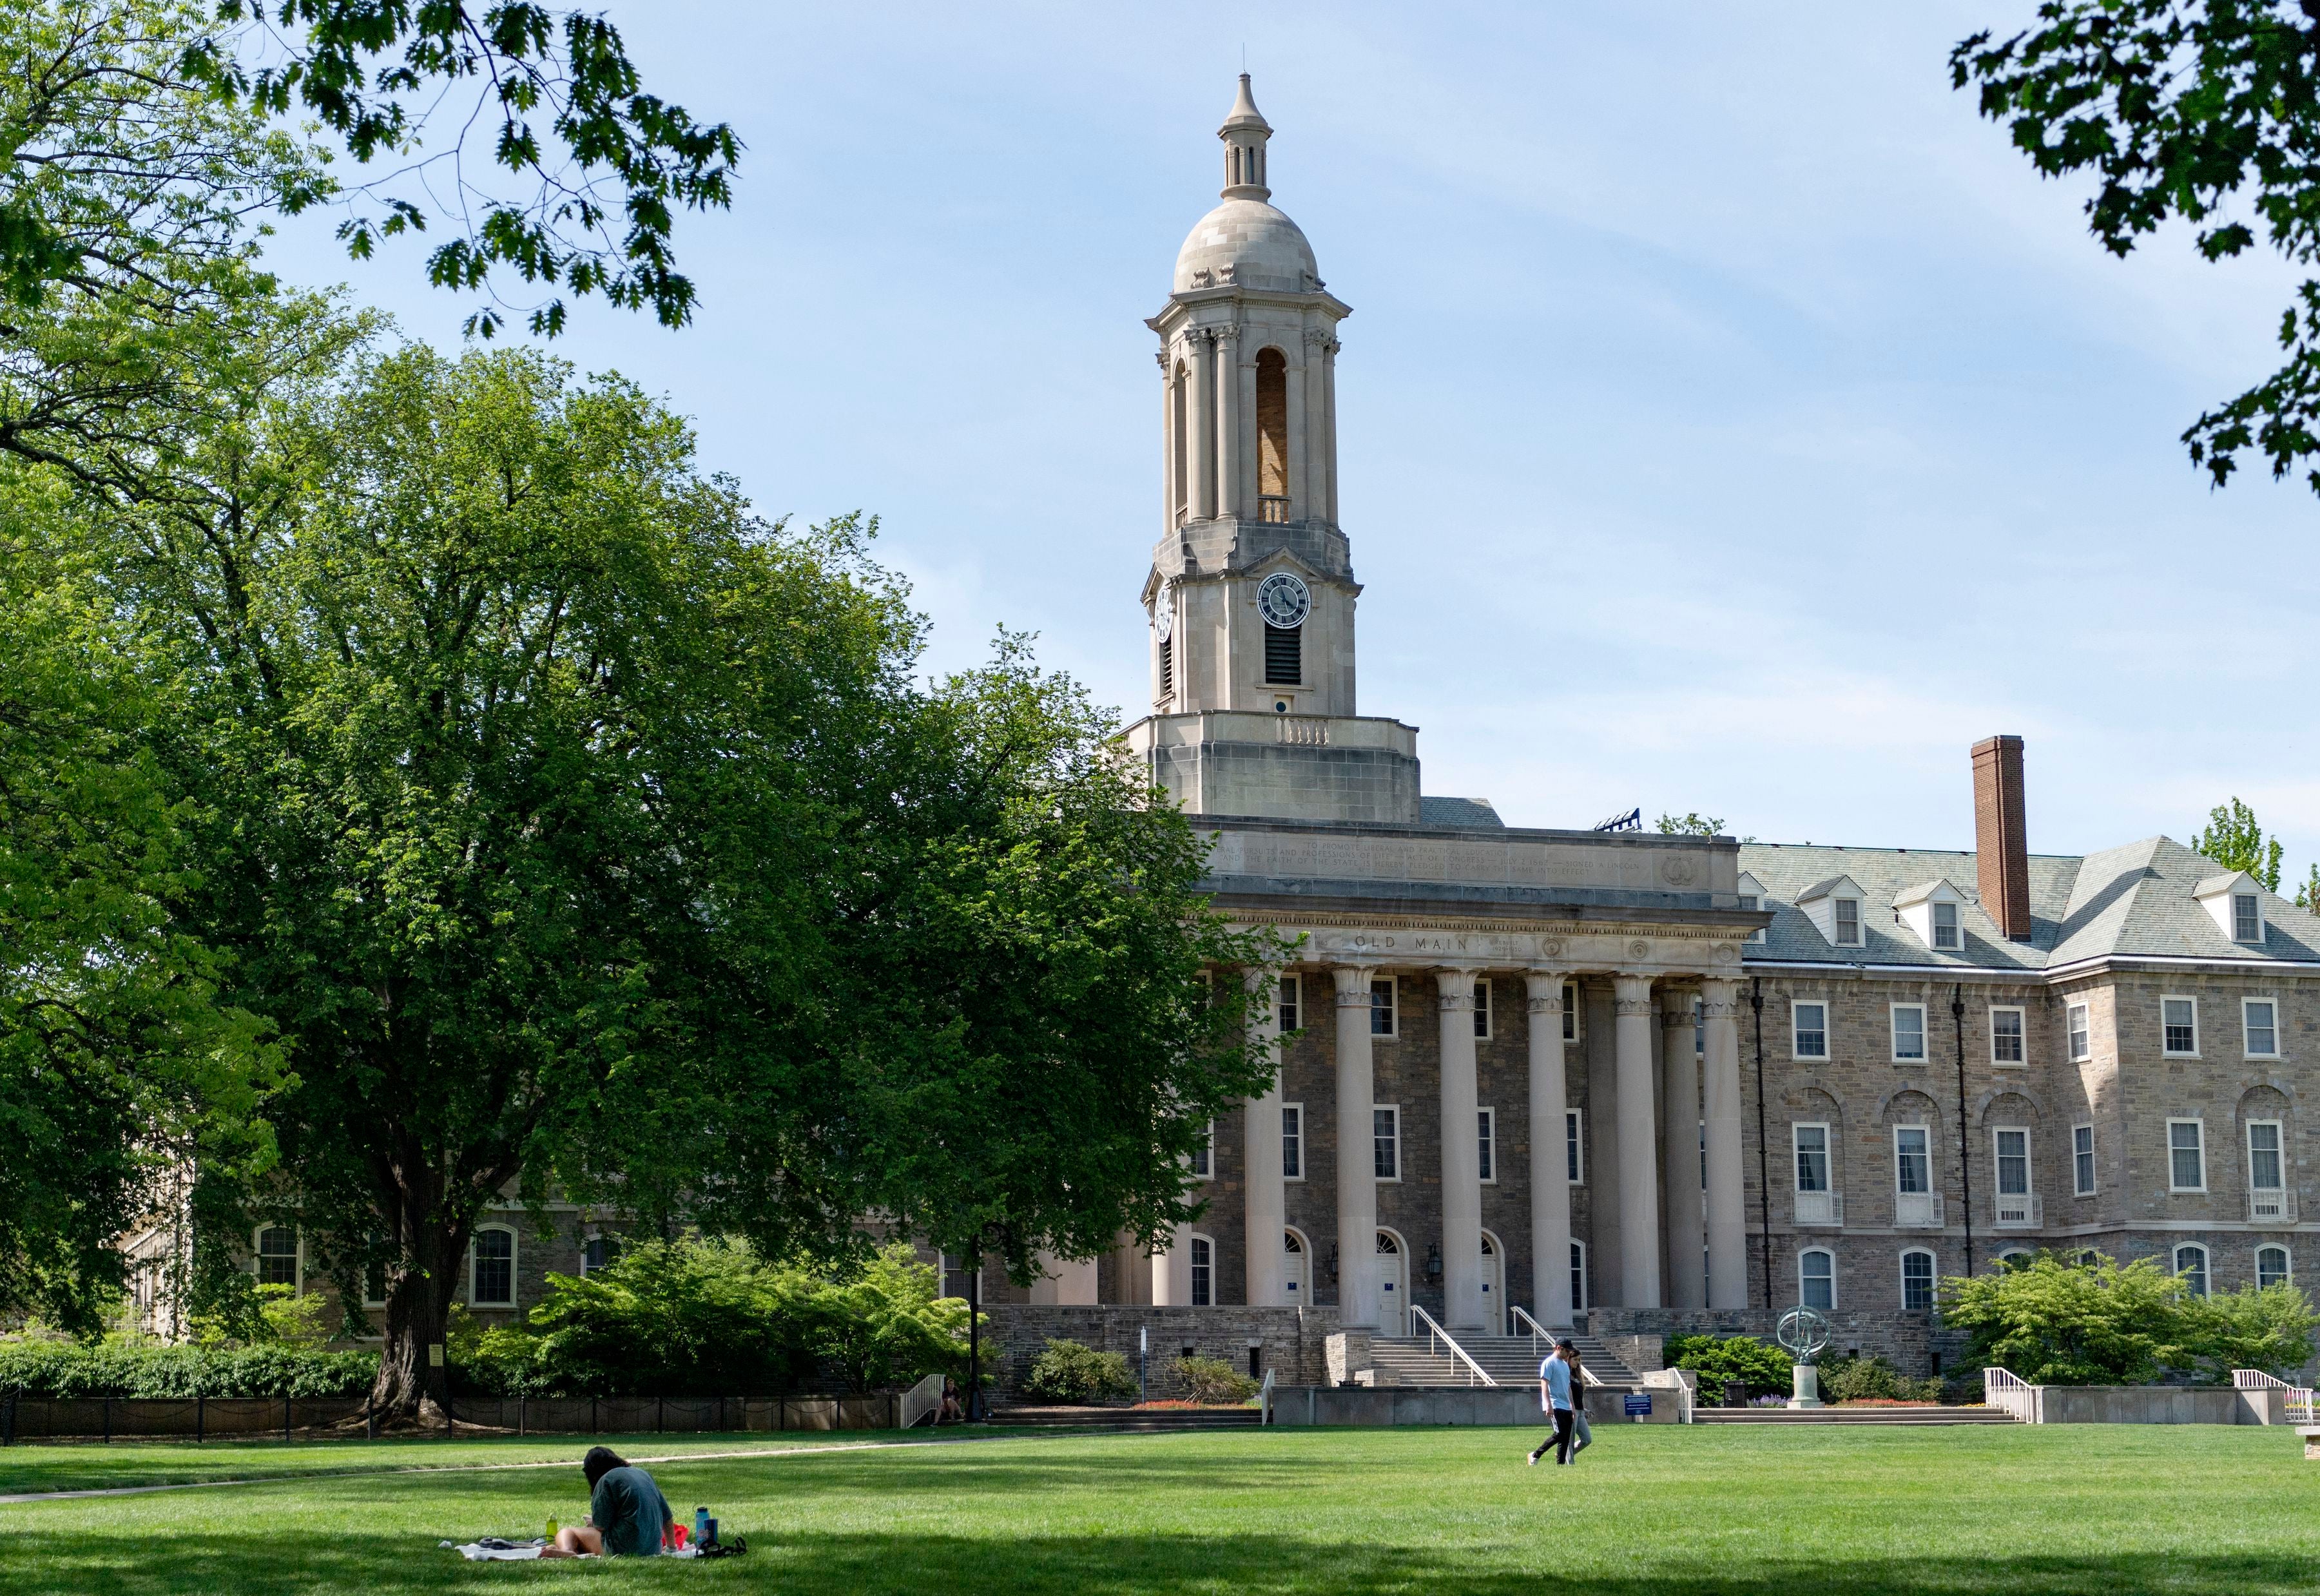 penn-state-pitt-and-others-get-hundreds-of-millions-in-taxpayer-funds-tracking-it-is-a